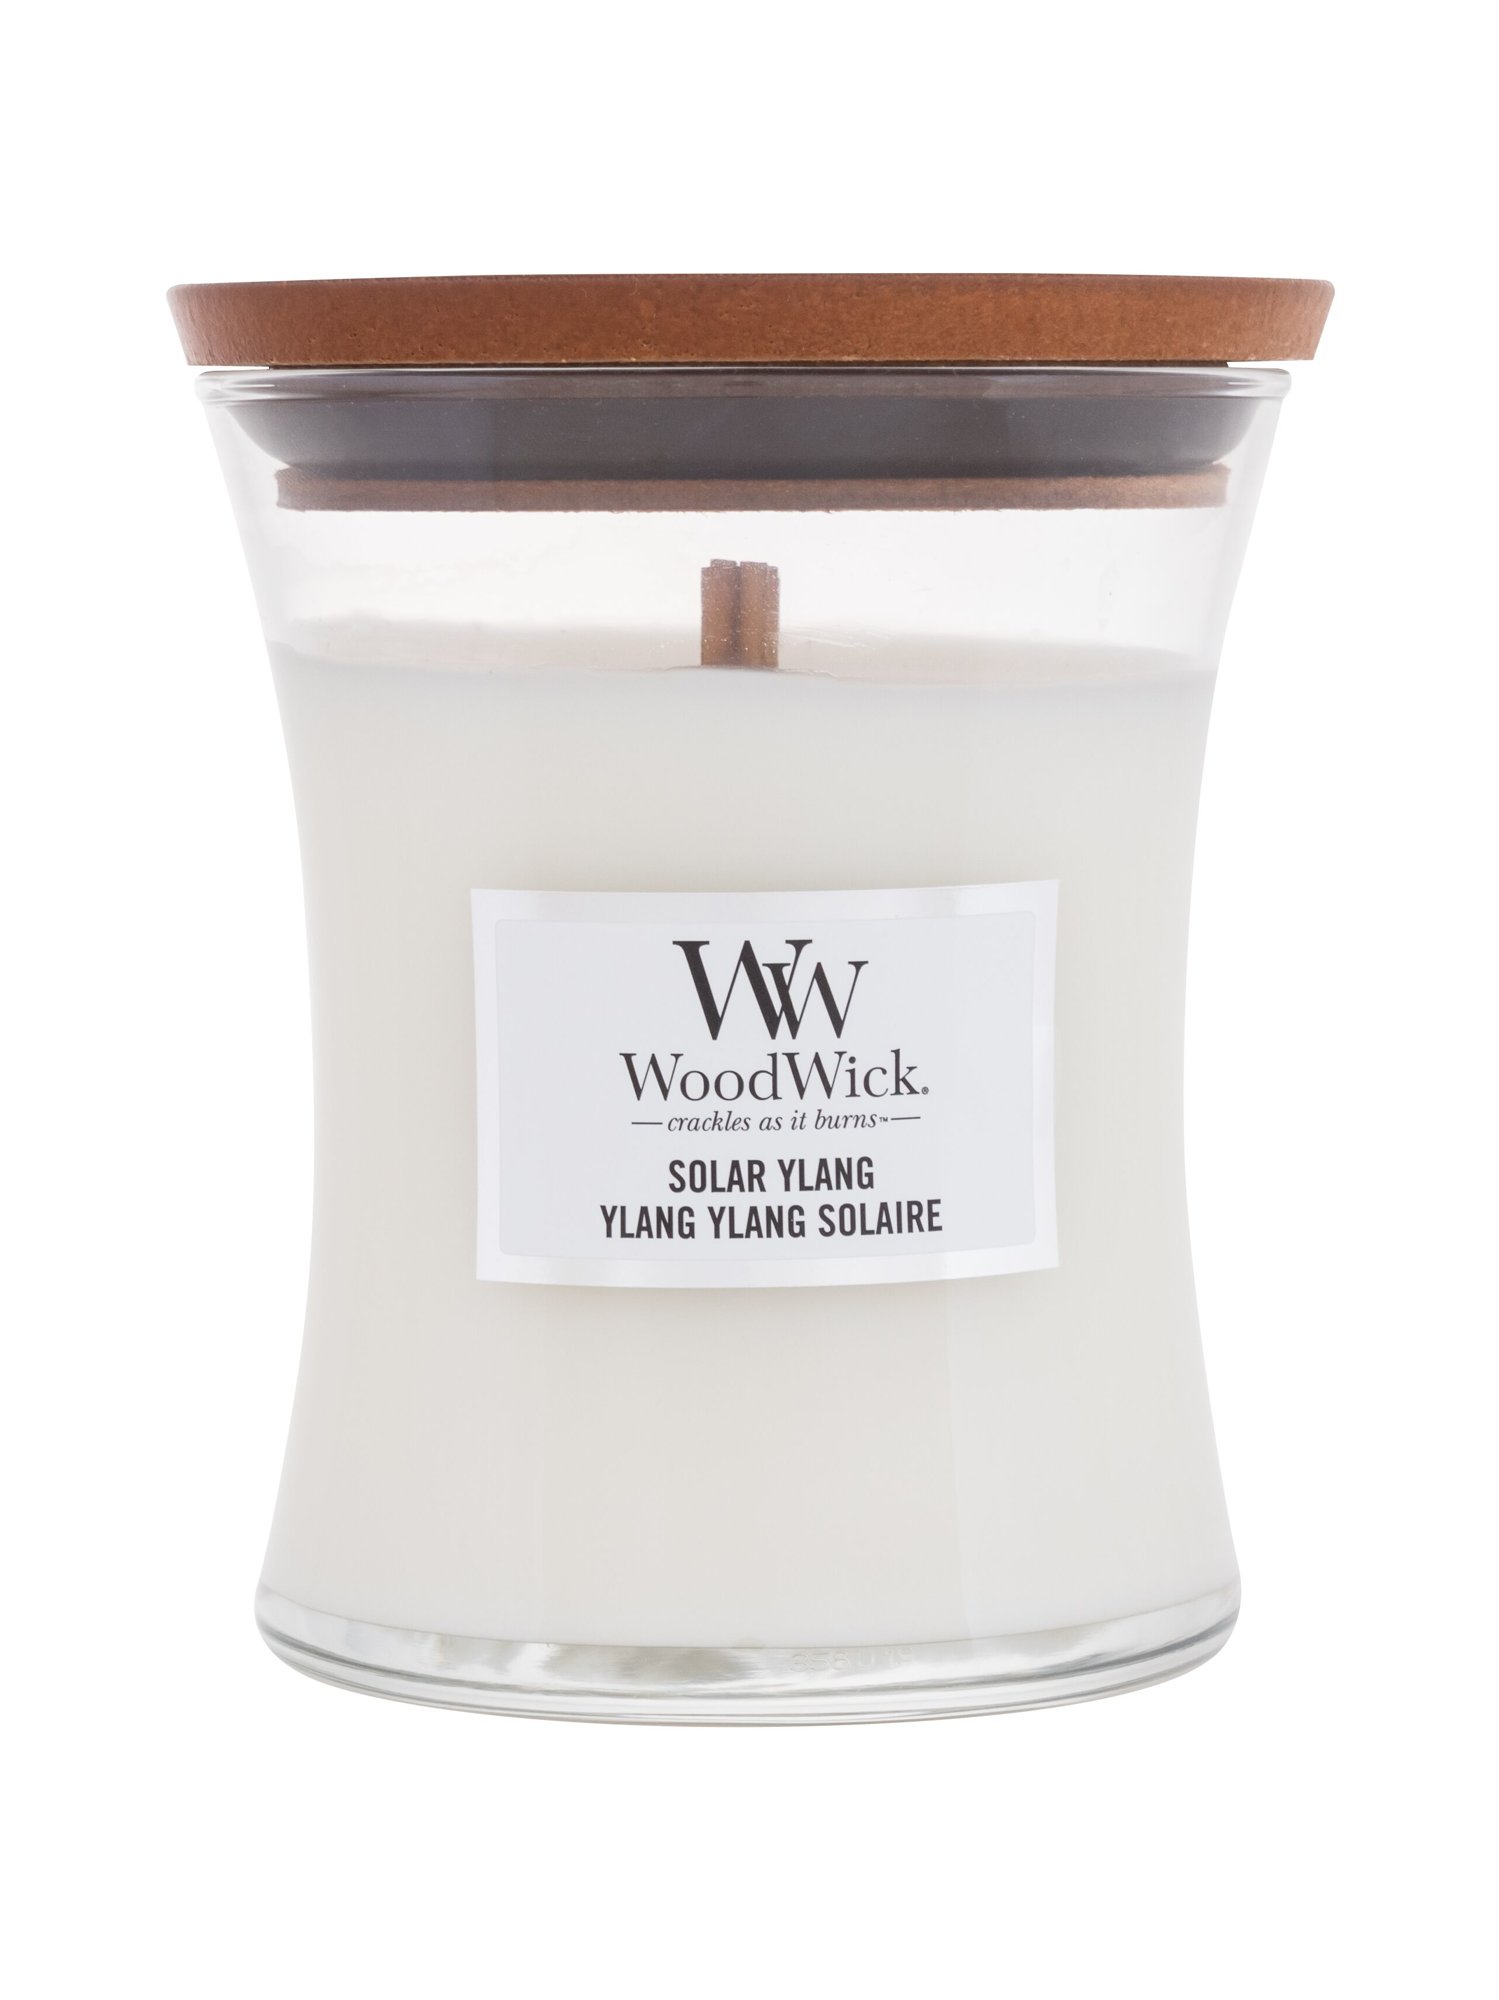 WoodWick Solar Ylang 275g Kvepalai Unisex Scented Candle